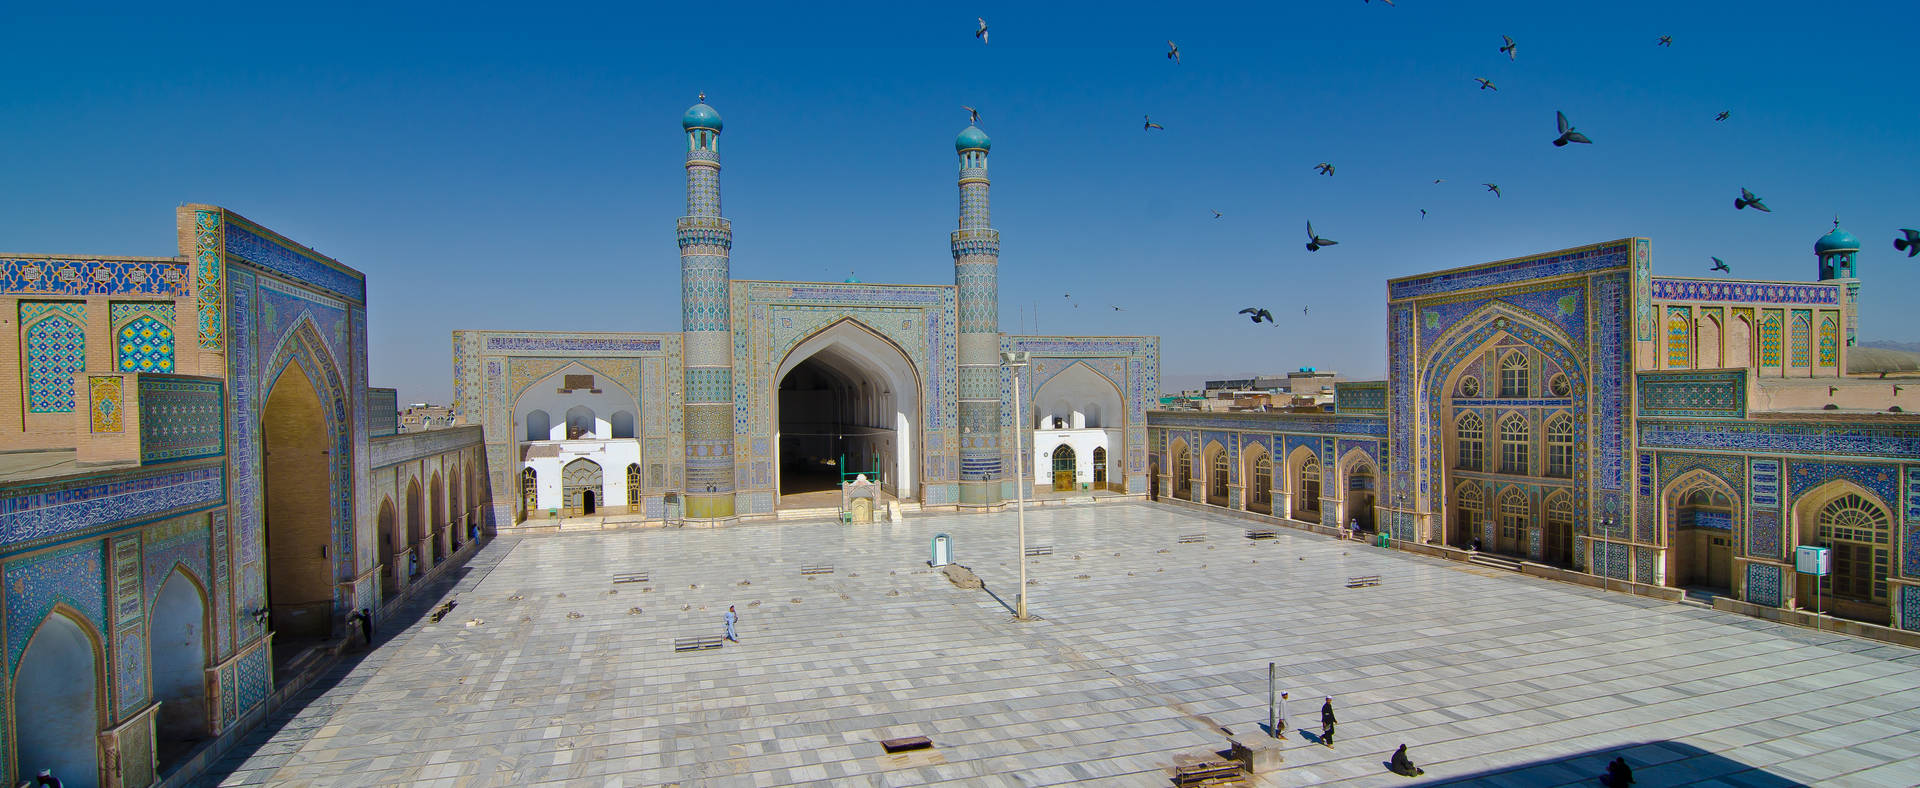 Afghanistan Herat Central Blue Mosque